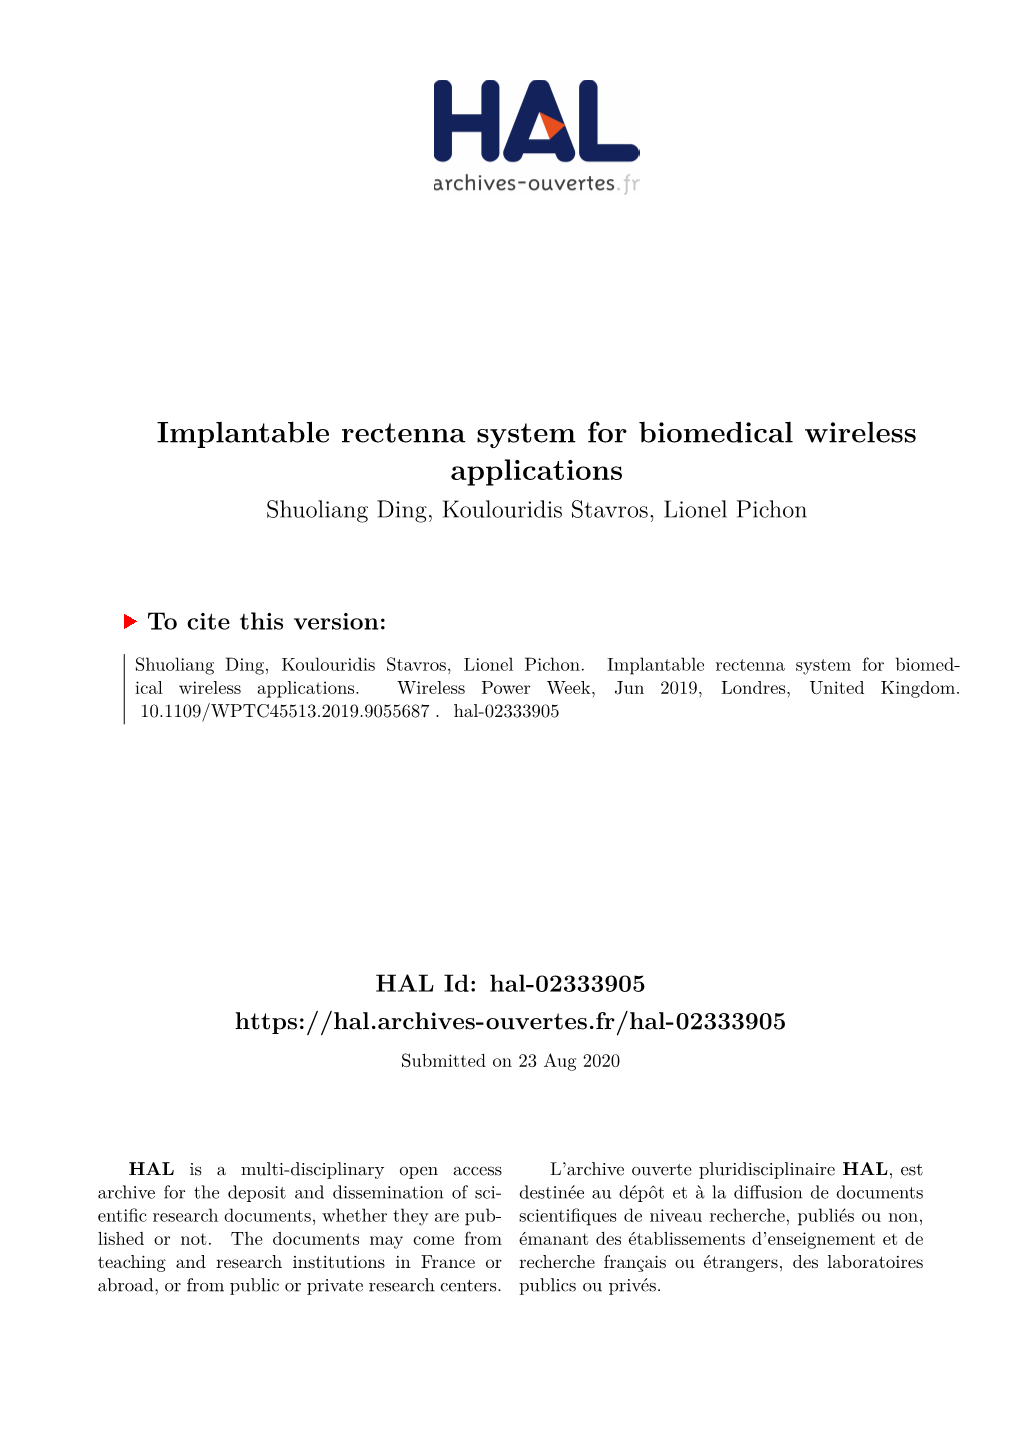 Implantable Rectenna System for Biomedical Wireless Applications Shuoliang Ding, Koulouridis Stavros, Lionel Pichon